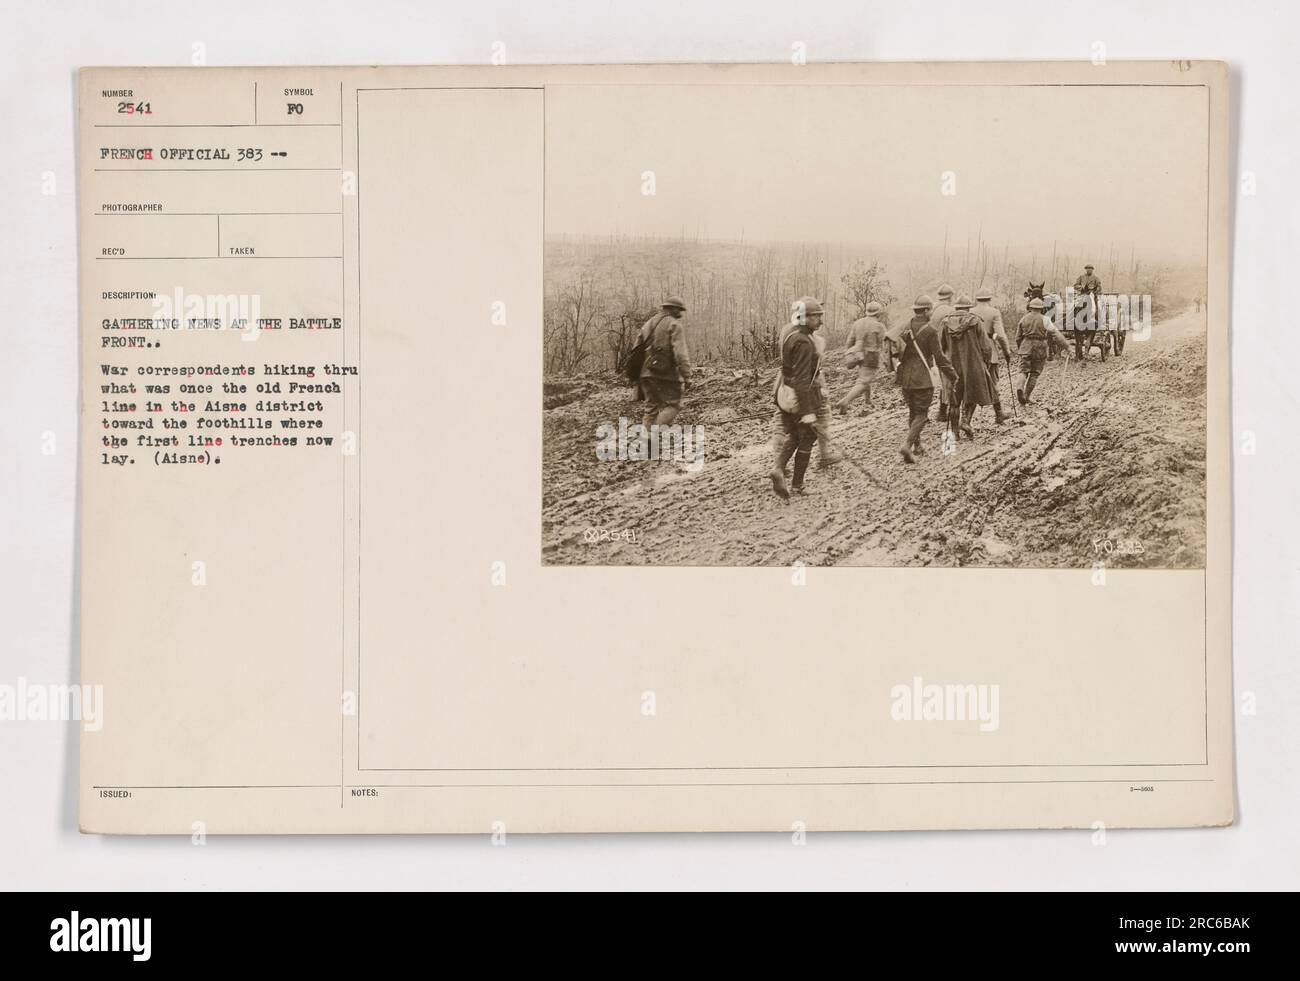 War correspondents hiking through the former French line in the Aisne district, gathering news at the battlefront. This image shows the journalists en route to the foothills where the first line trenches are now located. Stock Photo